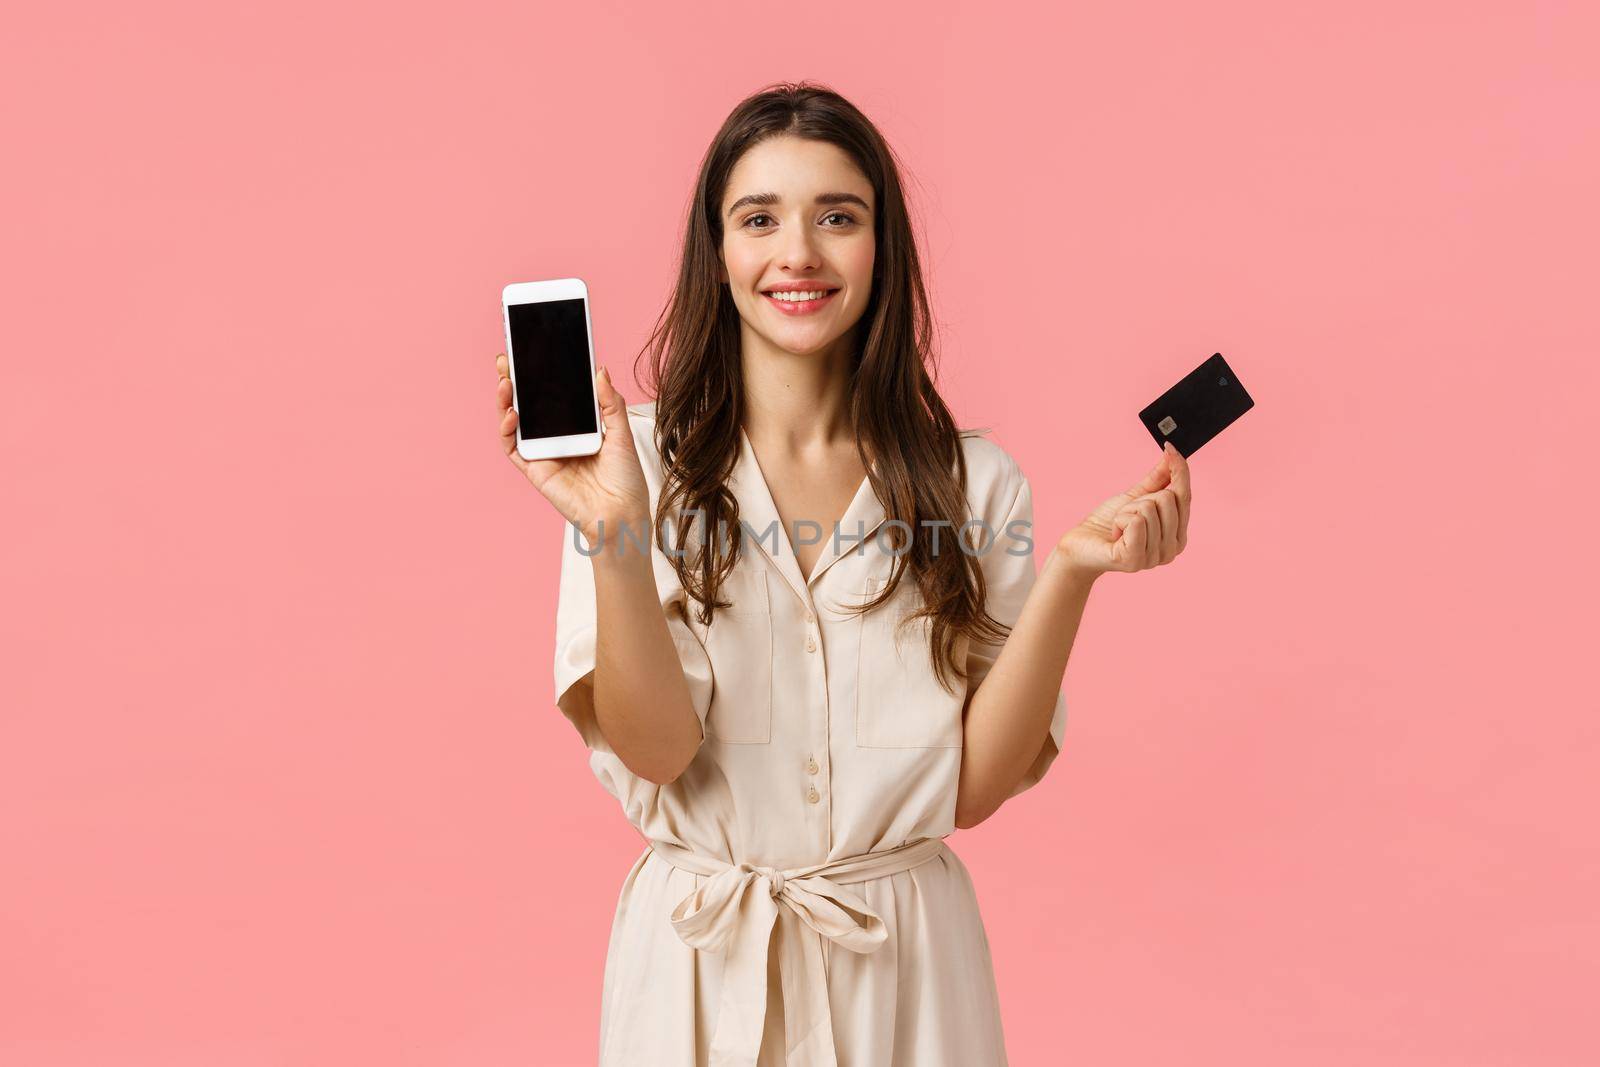 Presents, shopping and beauty concept. Fashionable young woman in trendy dress, holding smartphone and credit card, smiling cheerfully, order product online, standing pink background.